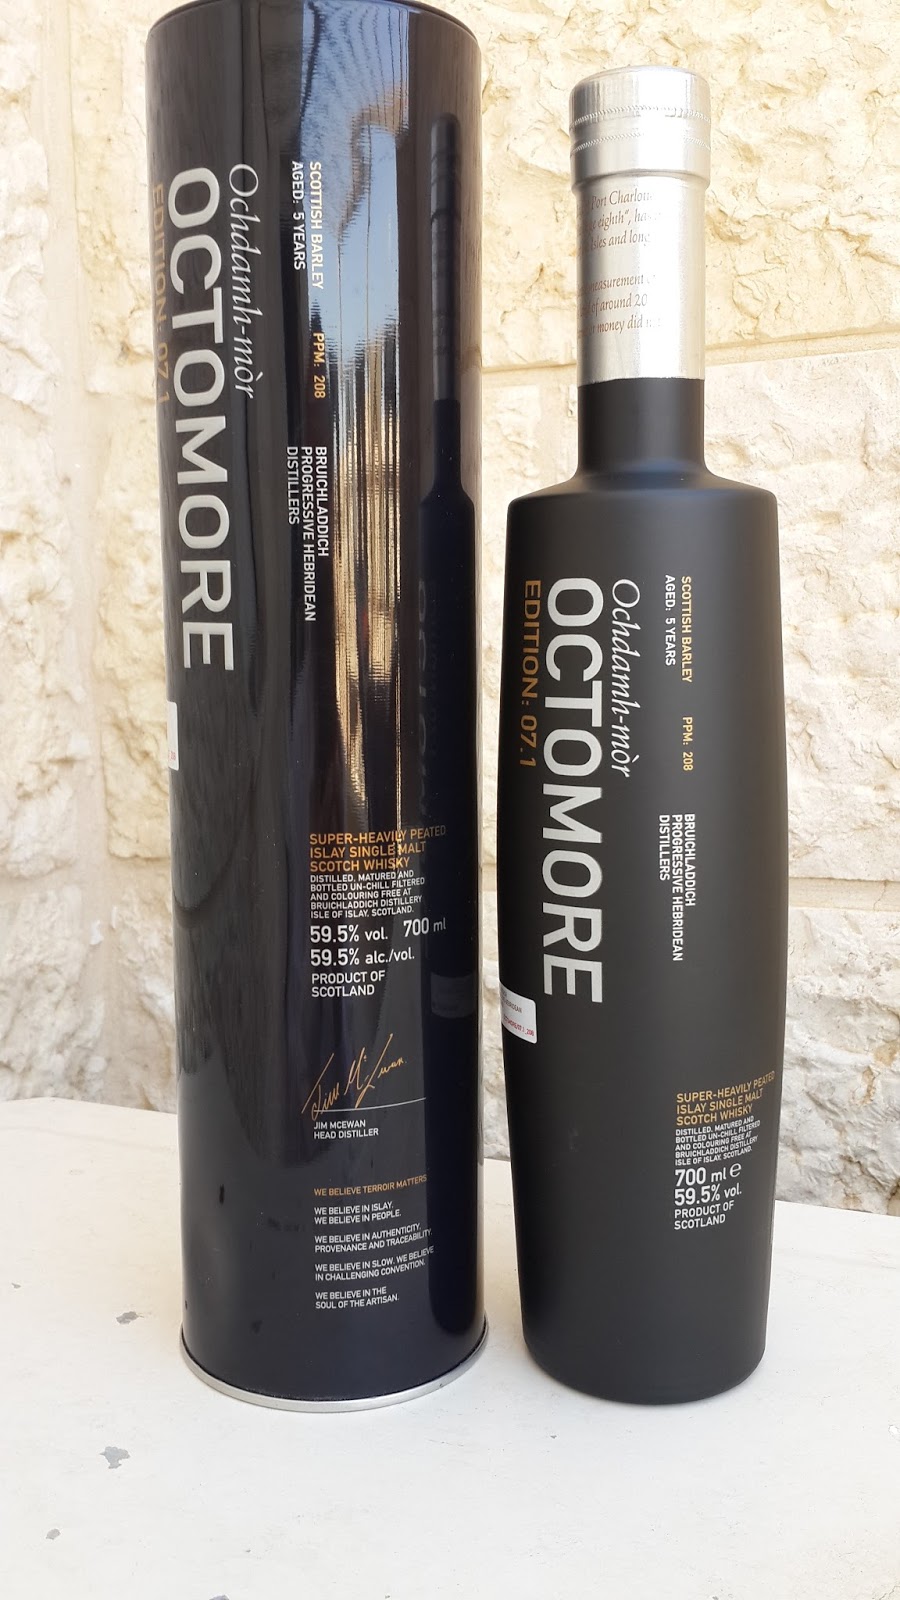 Bruichladdich Octomore 7 1 Review